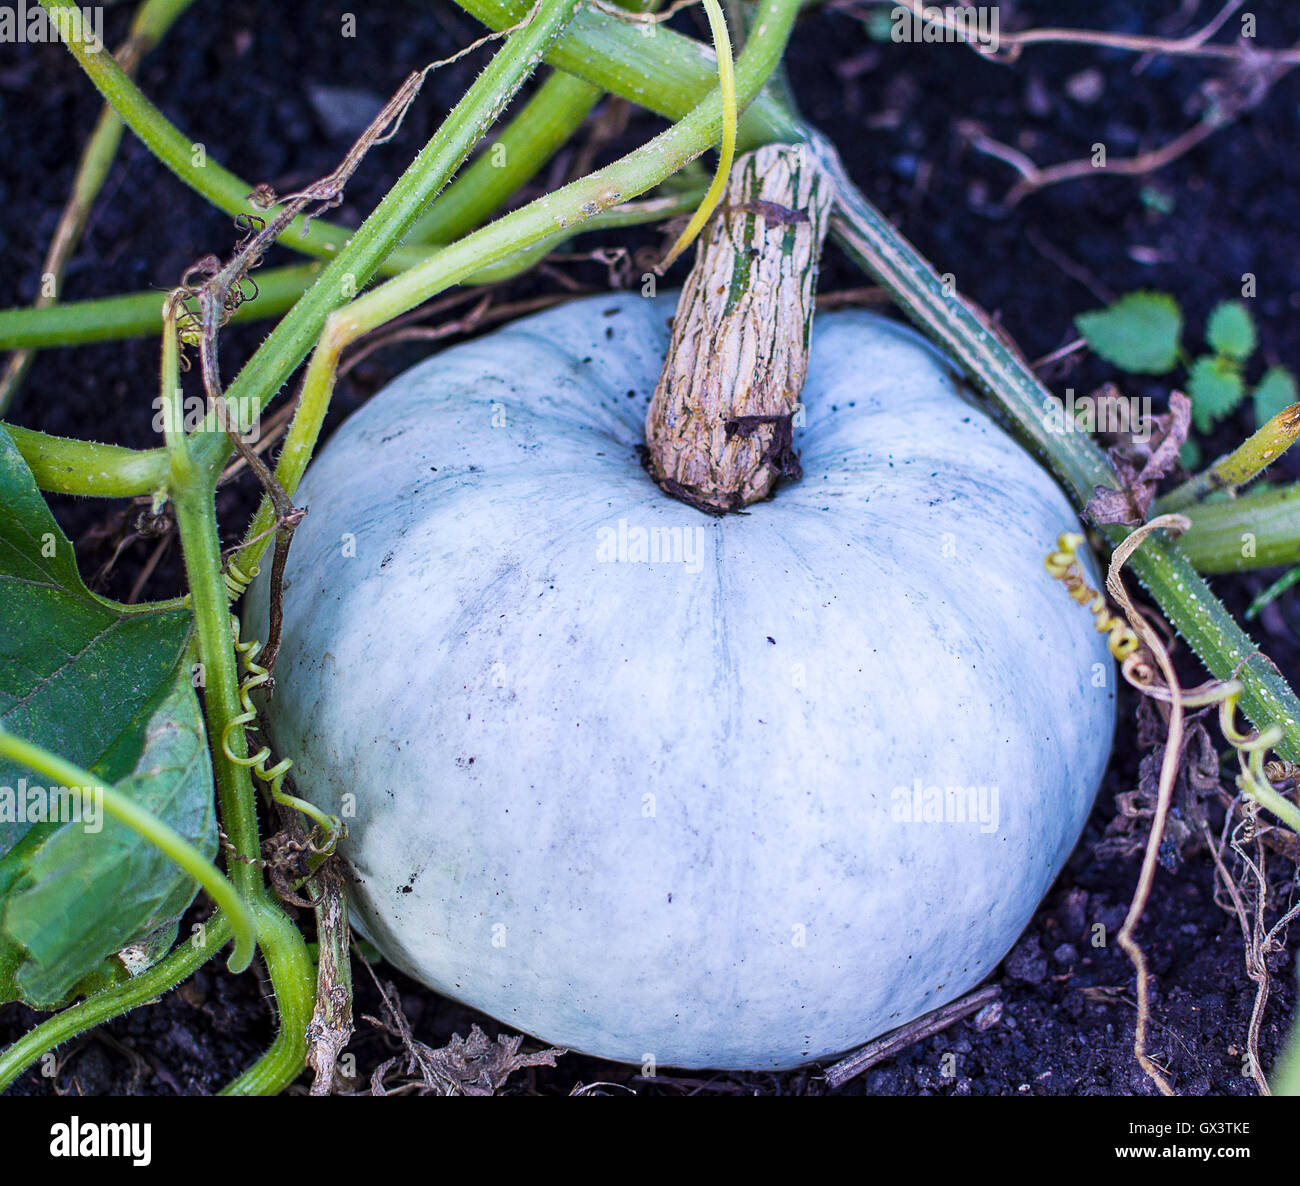 White pumpkin growing in garden. Cultivated fresh vegetables. White pumpkin in vegetable garden Stock Photo